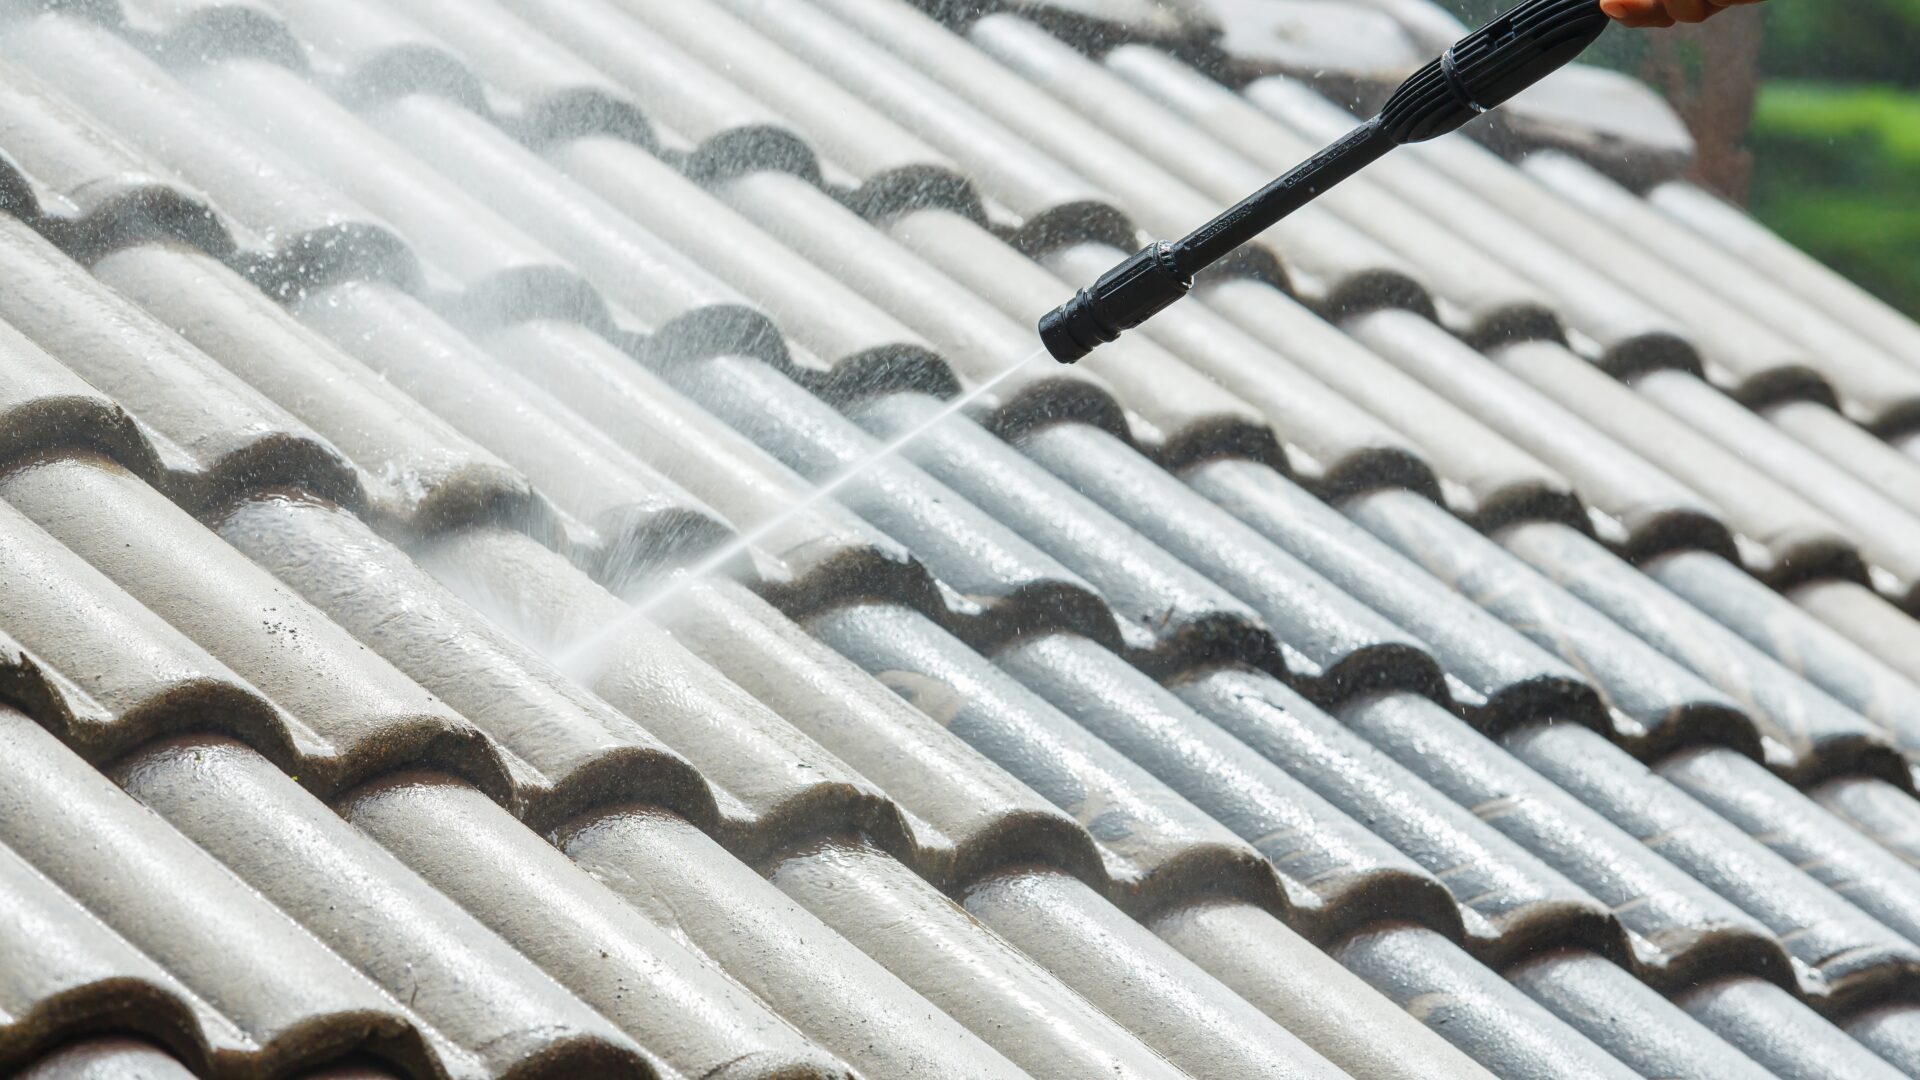 Closeup of tile roofing being sprayed with cleaner